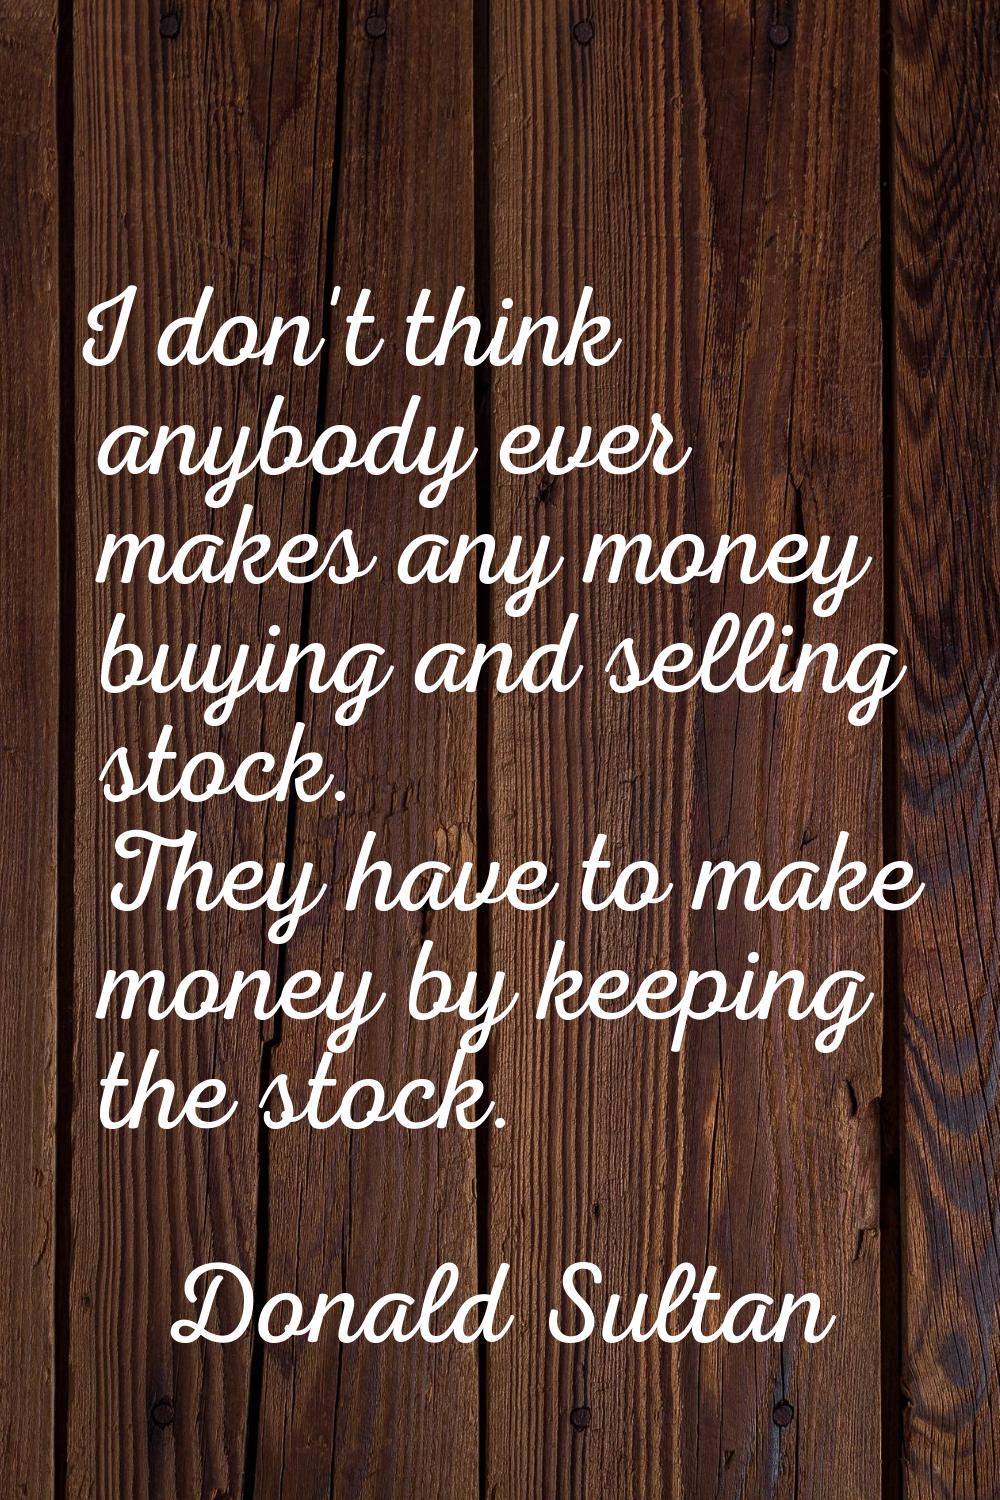 I don't think anybody ever makes any money buying and selling stock. They have to make money by kee